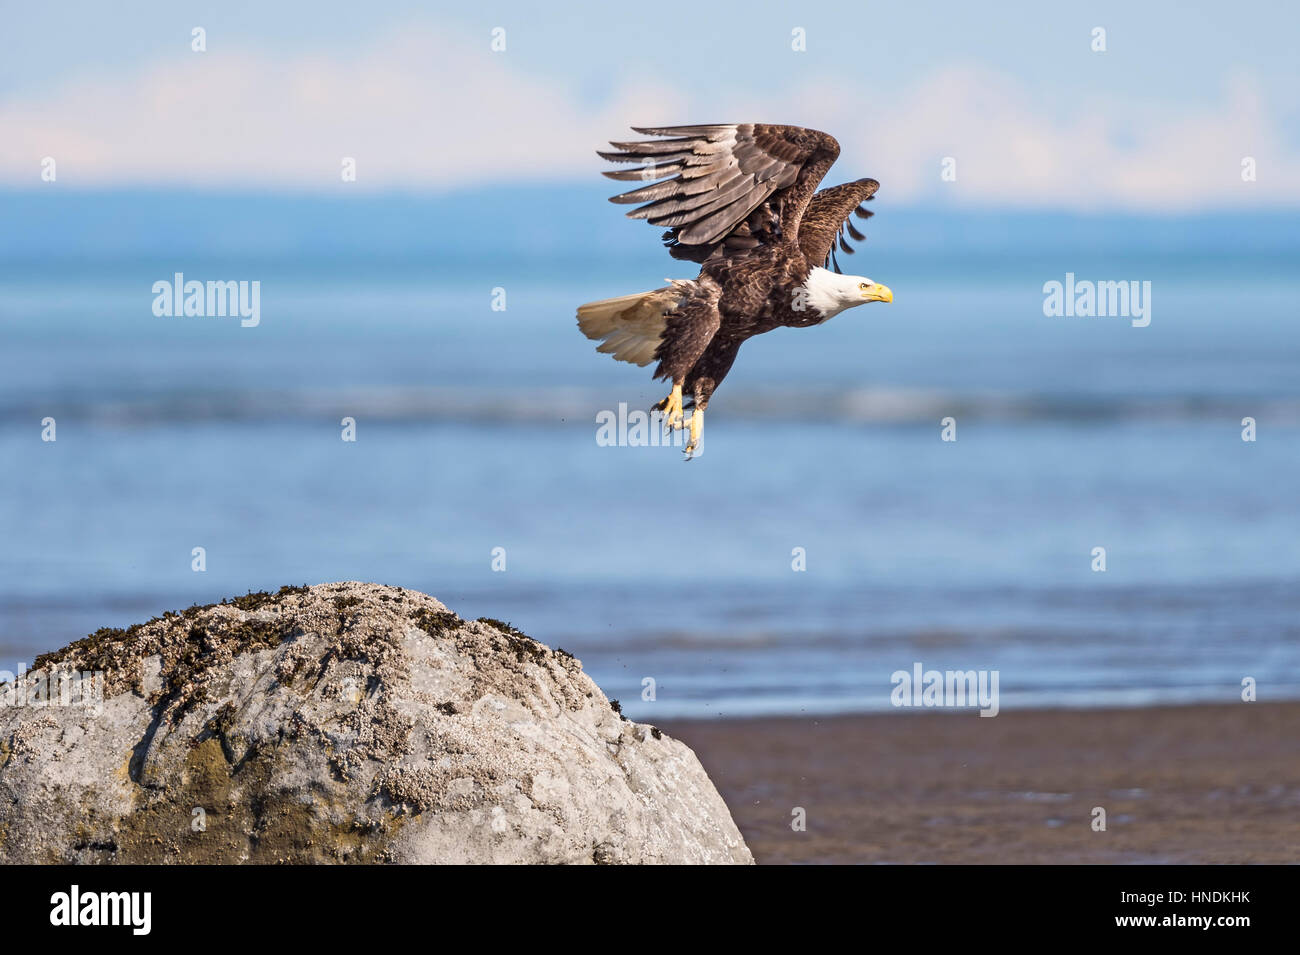 A bald eagle (Haliaeetus leucocephalus) takes off from a rock at low tide set against Cook Inlet and the distant Kenai Mountains. Stock Photo